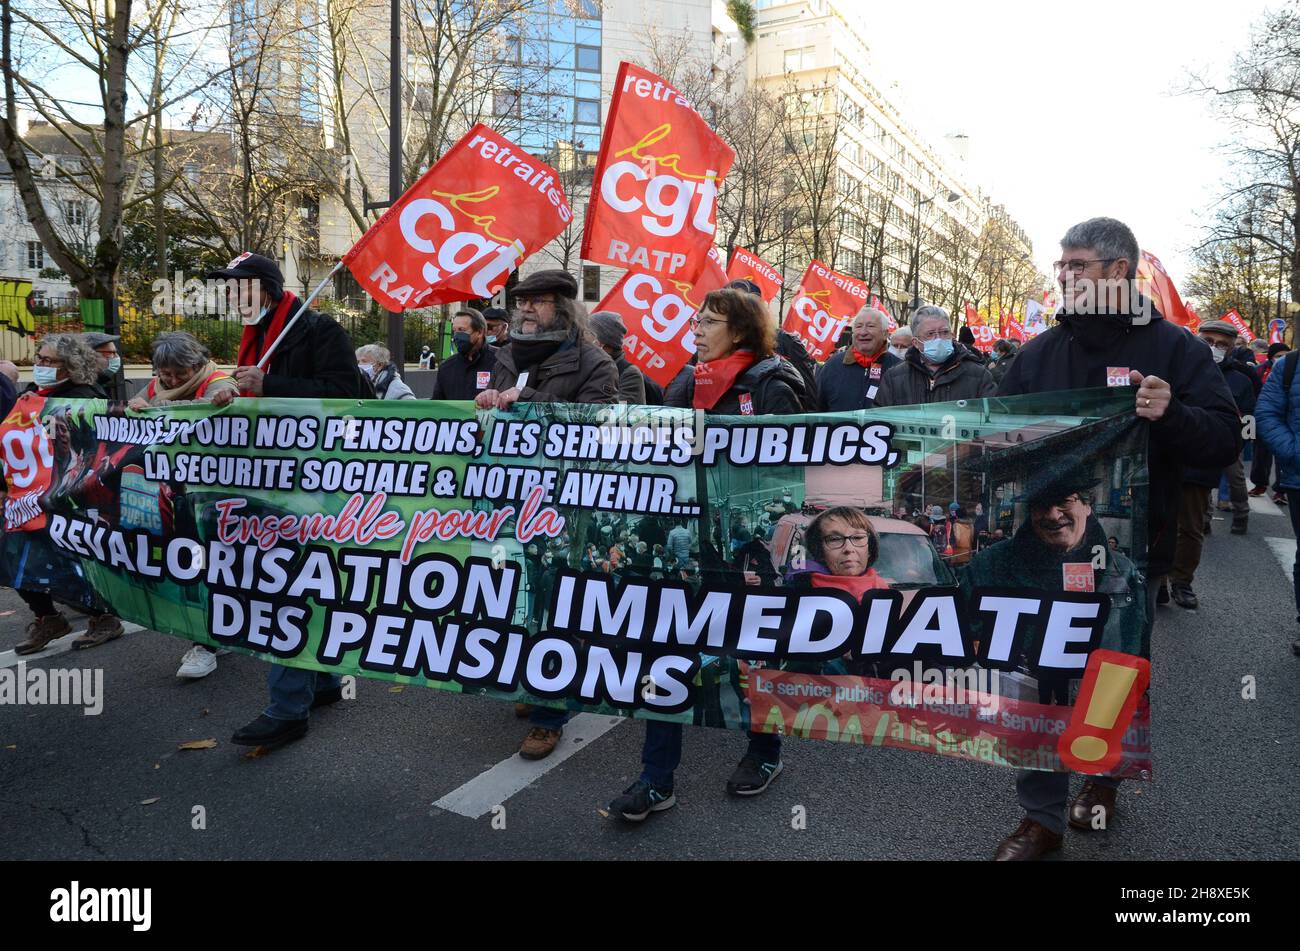 Paris national demonstration of retirees from Boulevard Raspail. Retirees came from all regions to ask for a revaluation of their pensions. Stock Photo